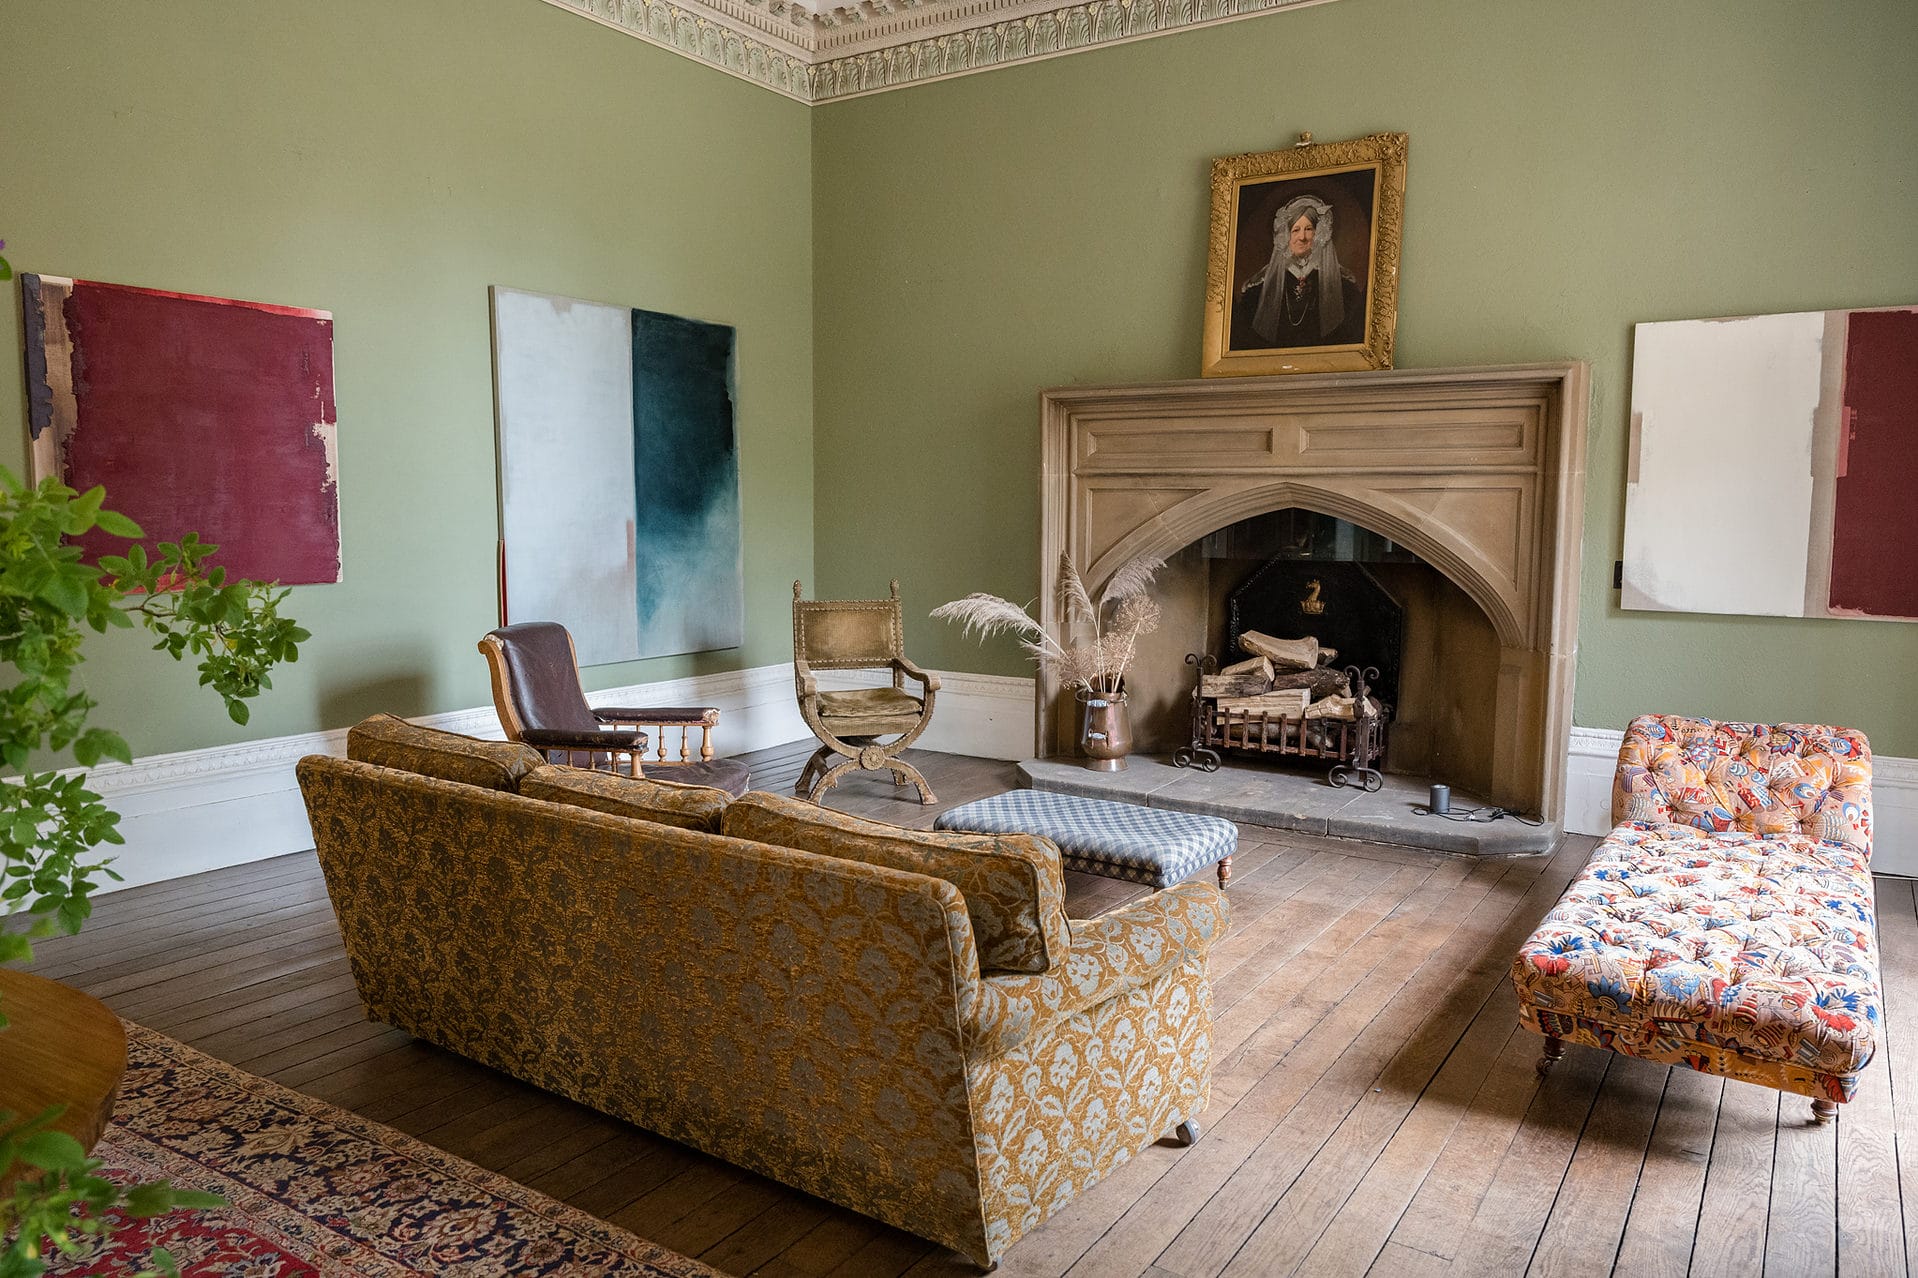 The entrance hall at Keythorpe Manor with a huge fireplace, sofas, period portraits, and modern art